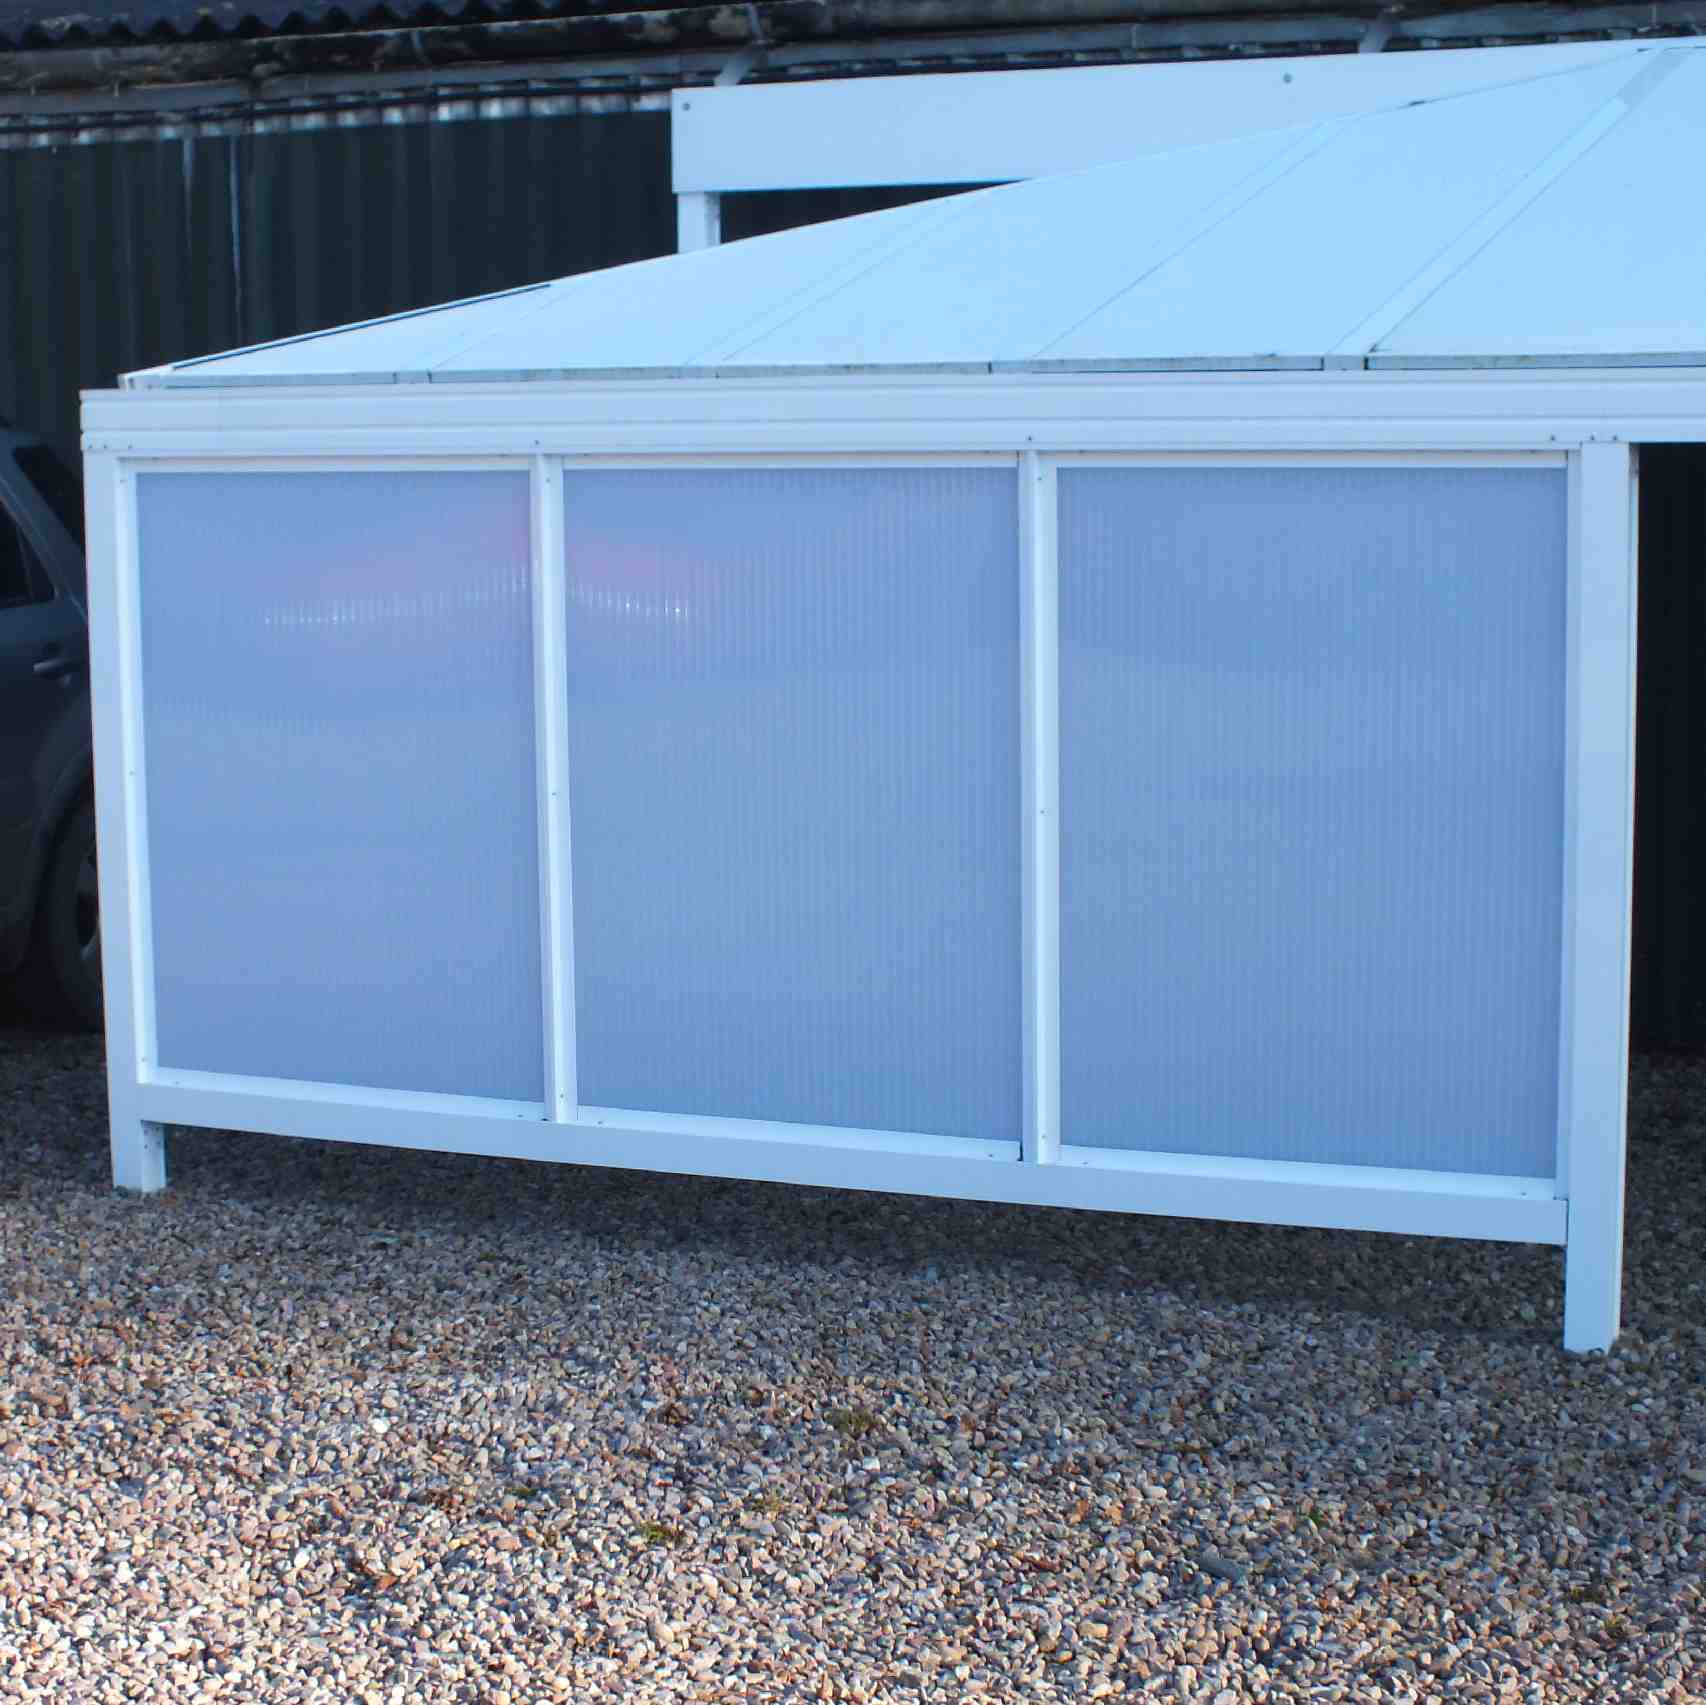 Omega Smart Canopy - UNDER EAVES In-Fill Sections (3 In-Fill Panels),  6mm Glass Clear Plate Polycarbonate In-Fill Panels, White Frame